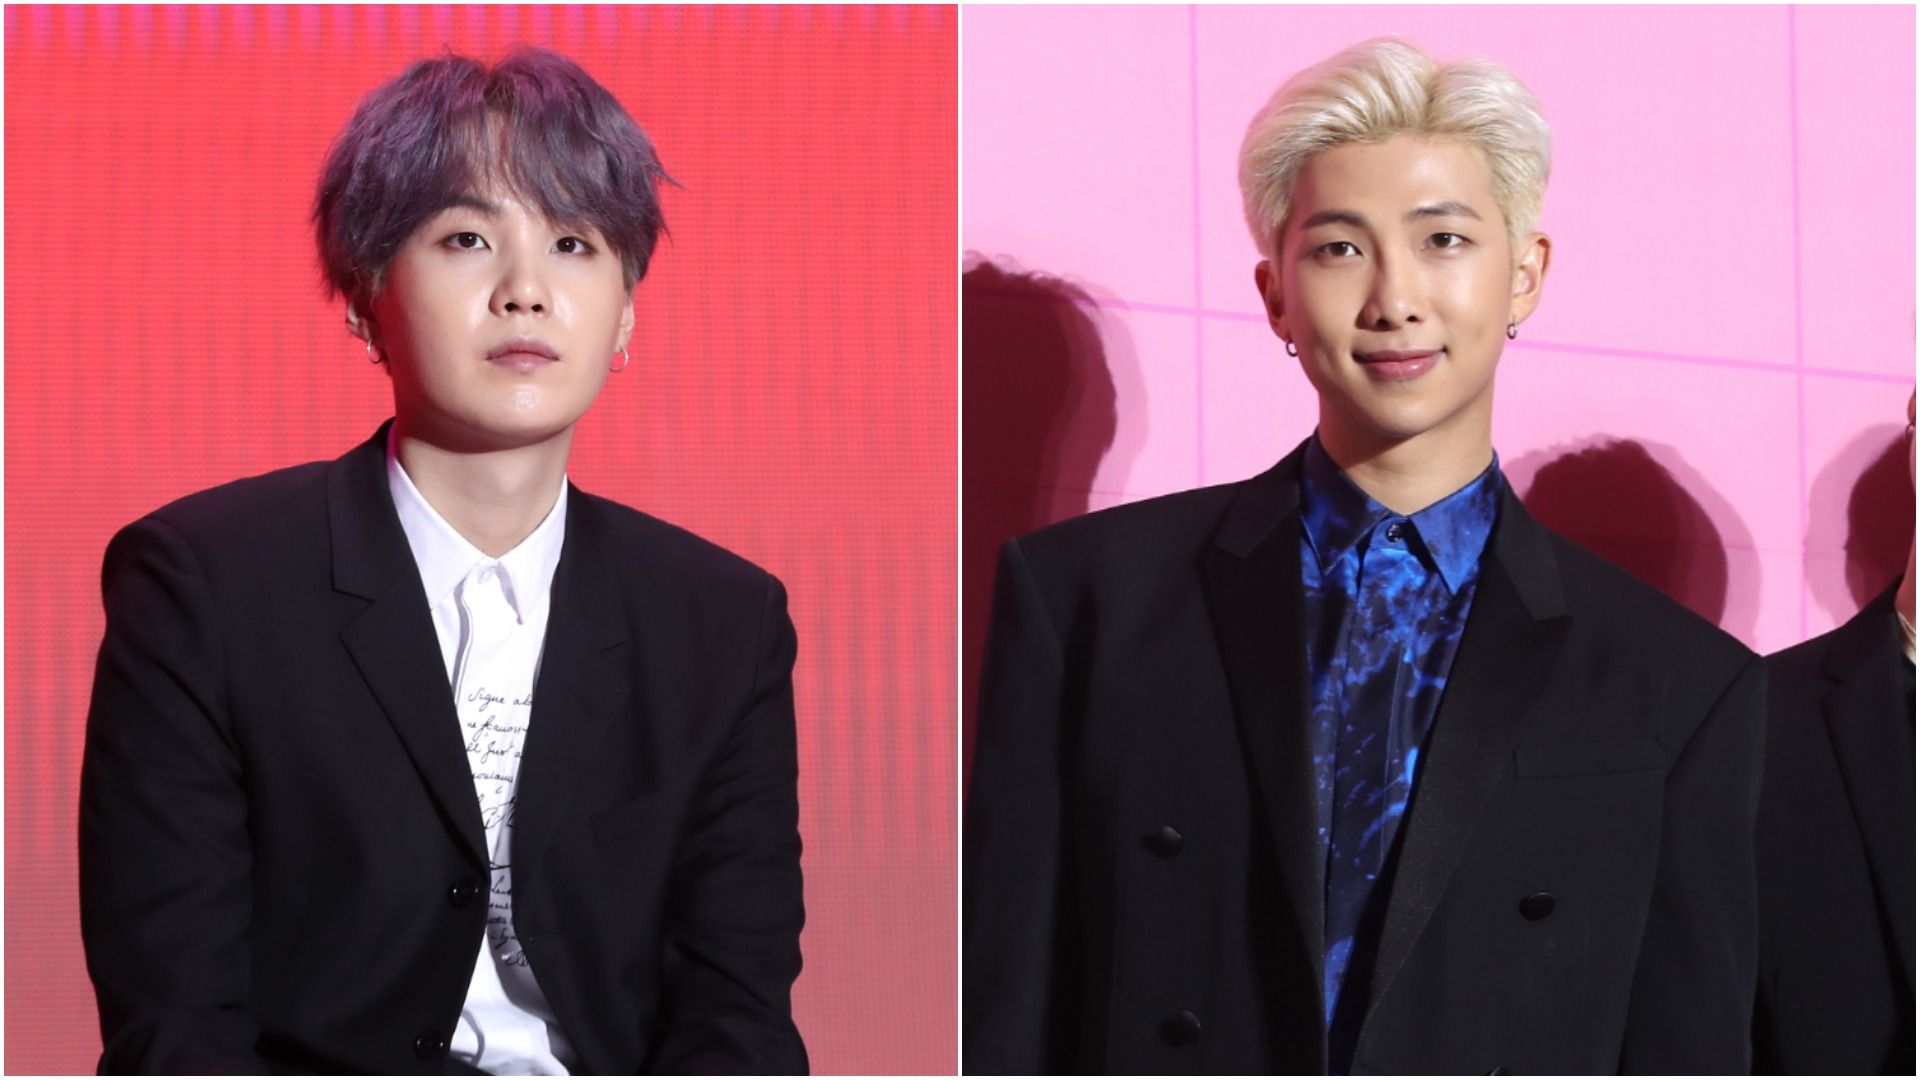 Bts'S All Night Lyrics References And Meaning - Bts Rm And Suga New Songs